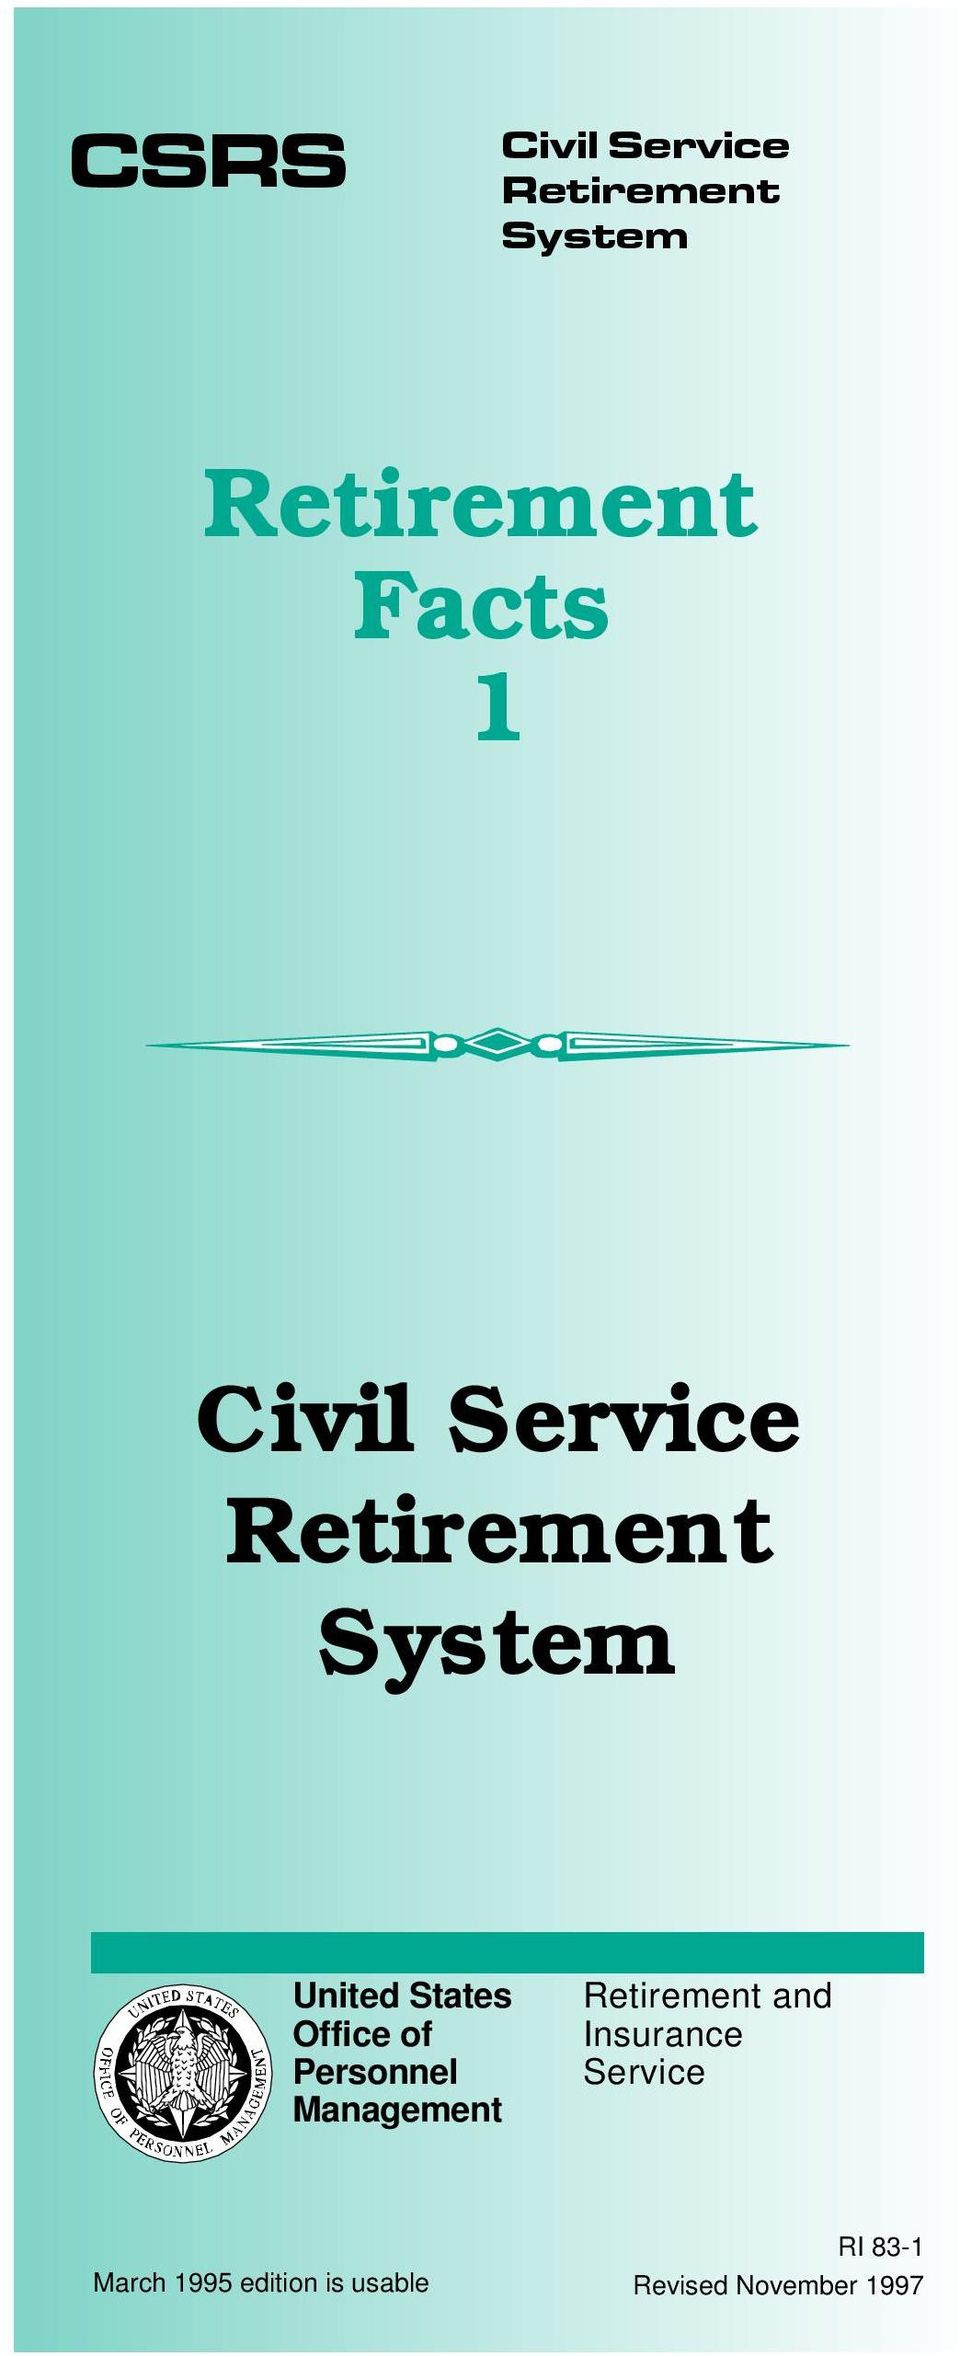 Personnel Management Retirement and Insurance Service